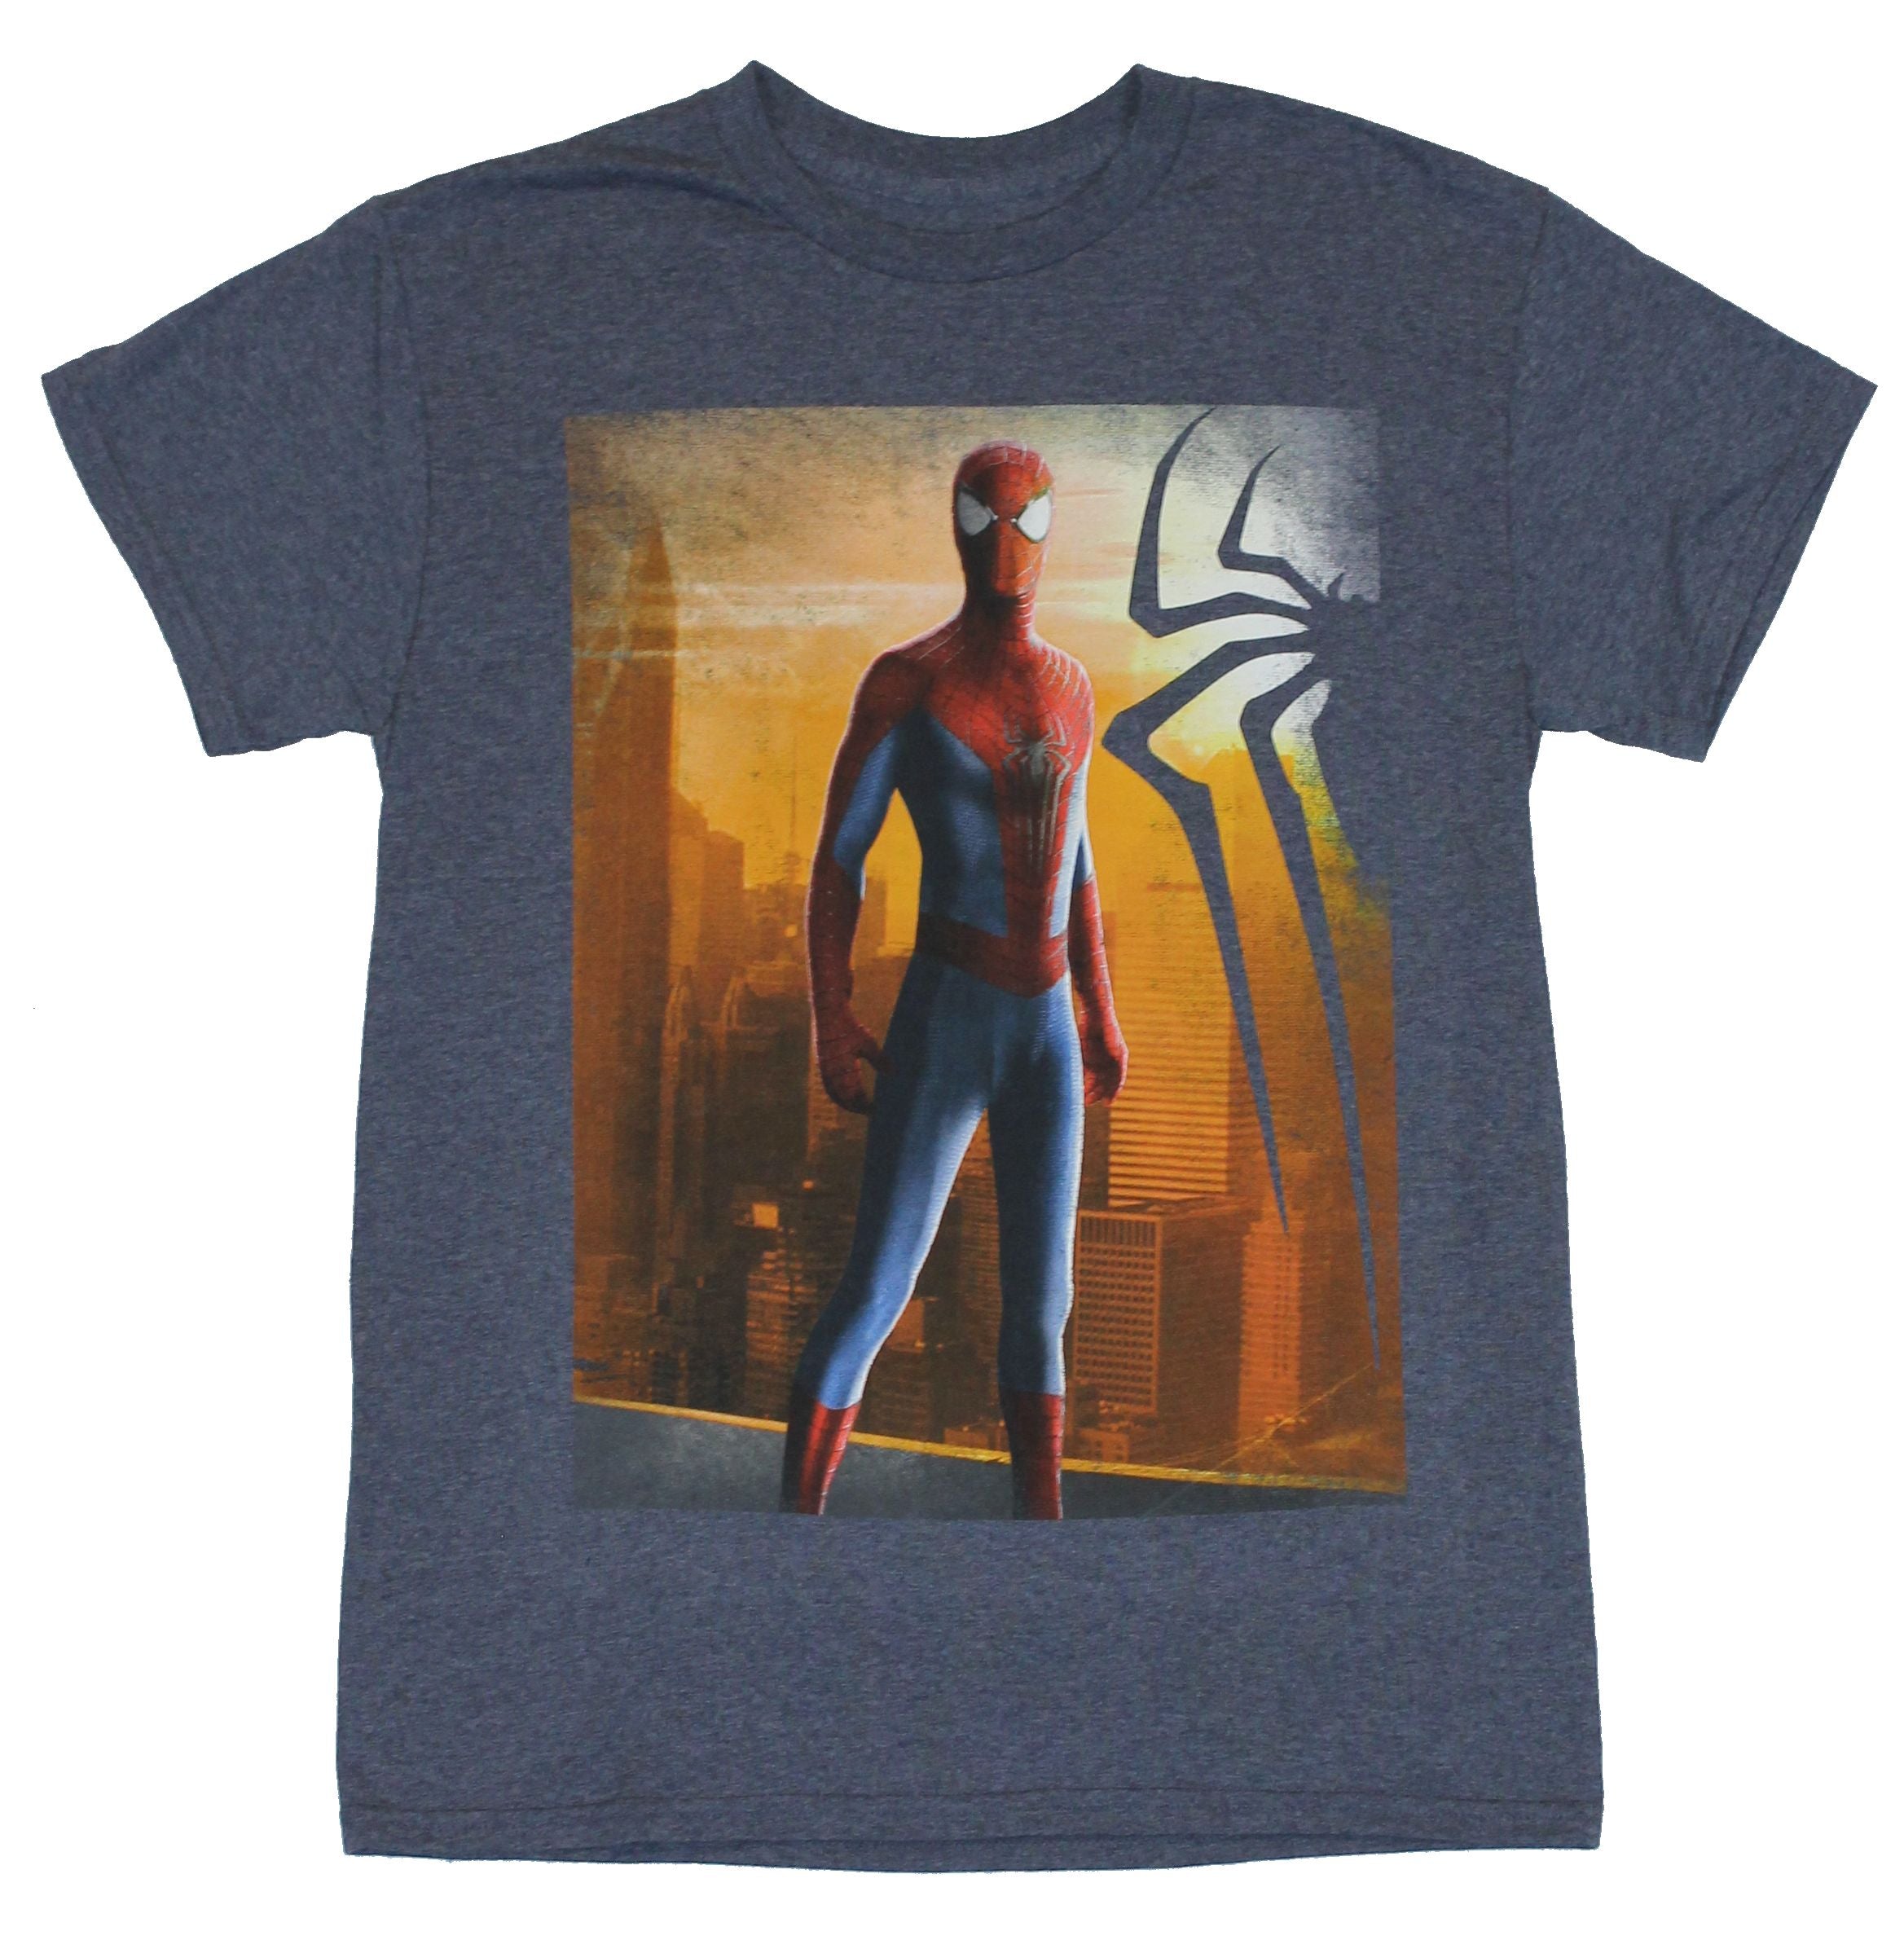 Spider-Man Mens T-Shirt - Posed in Front of a Sunset Cityscape Image